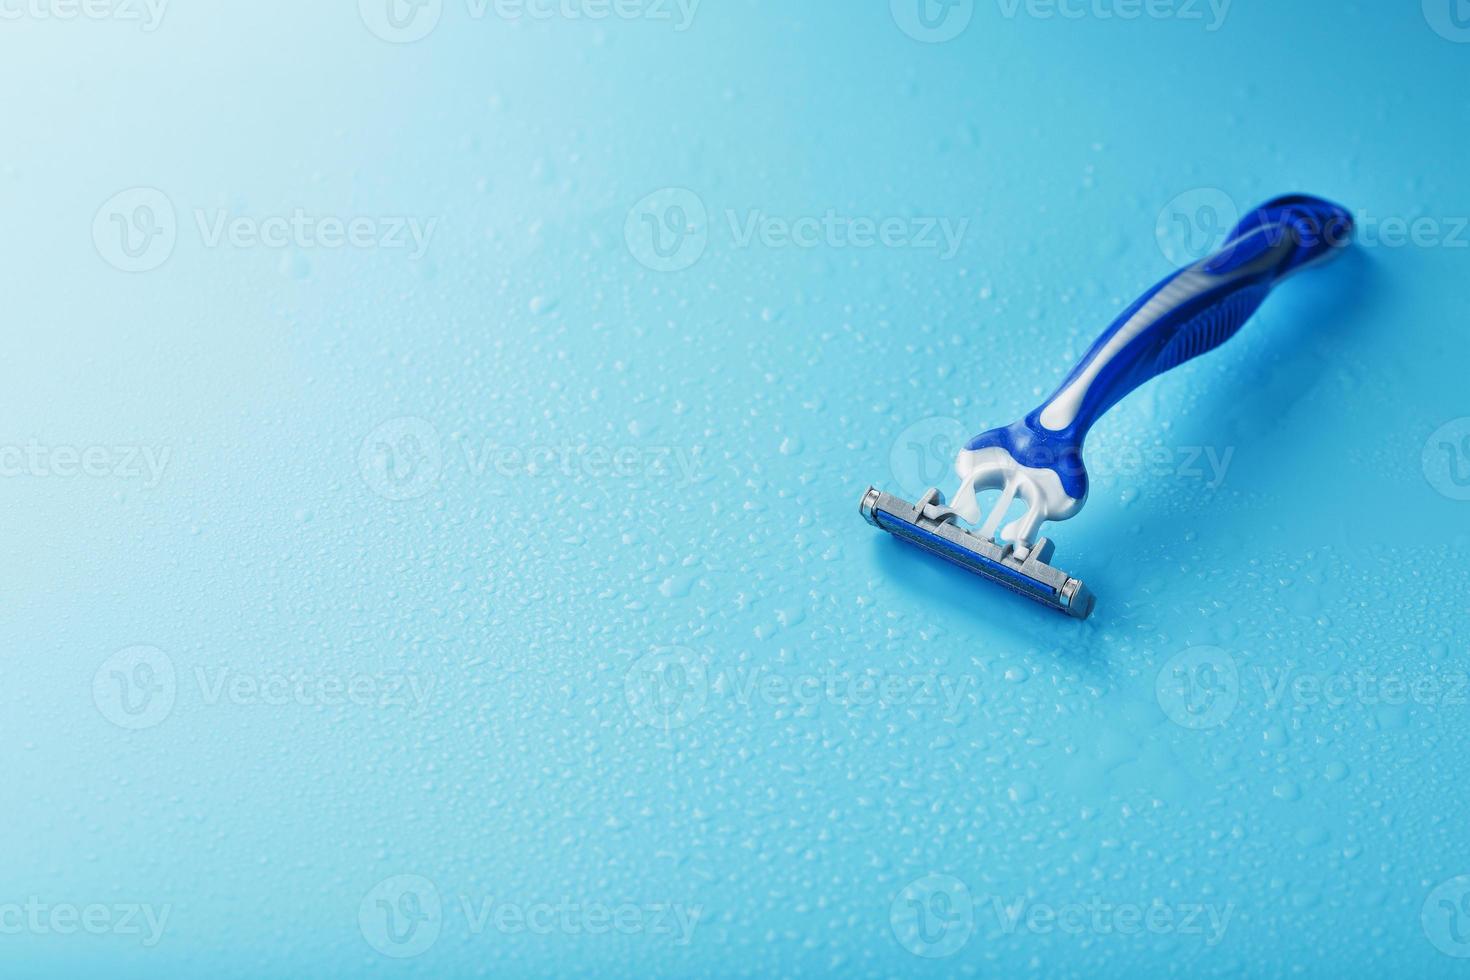 Razor blades on a blue background with drops of icy water photo